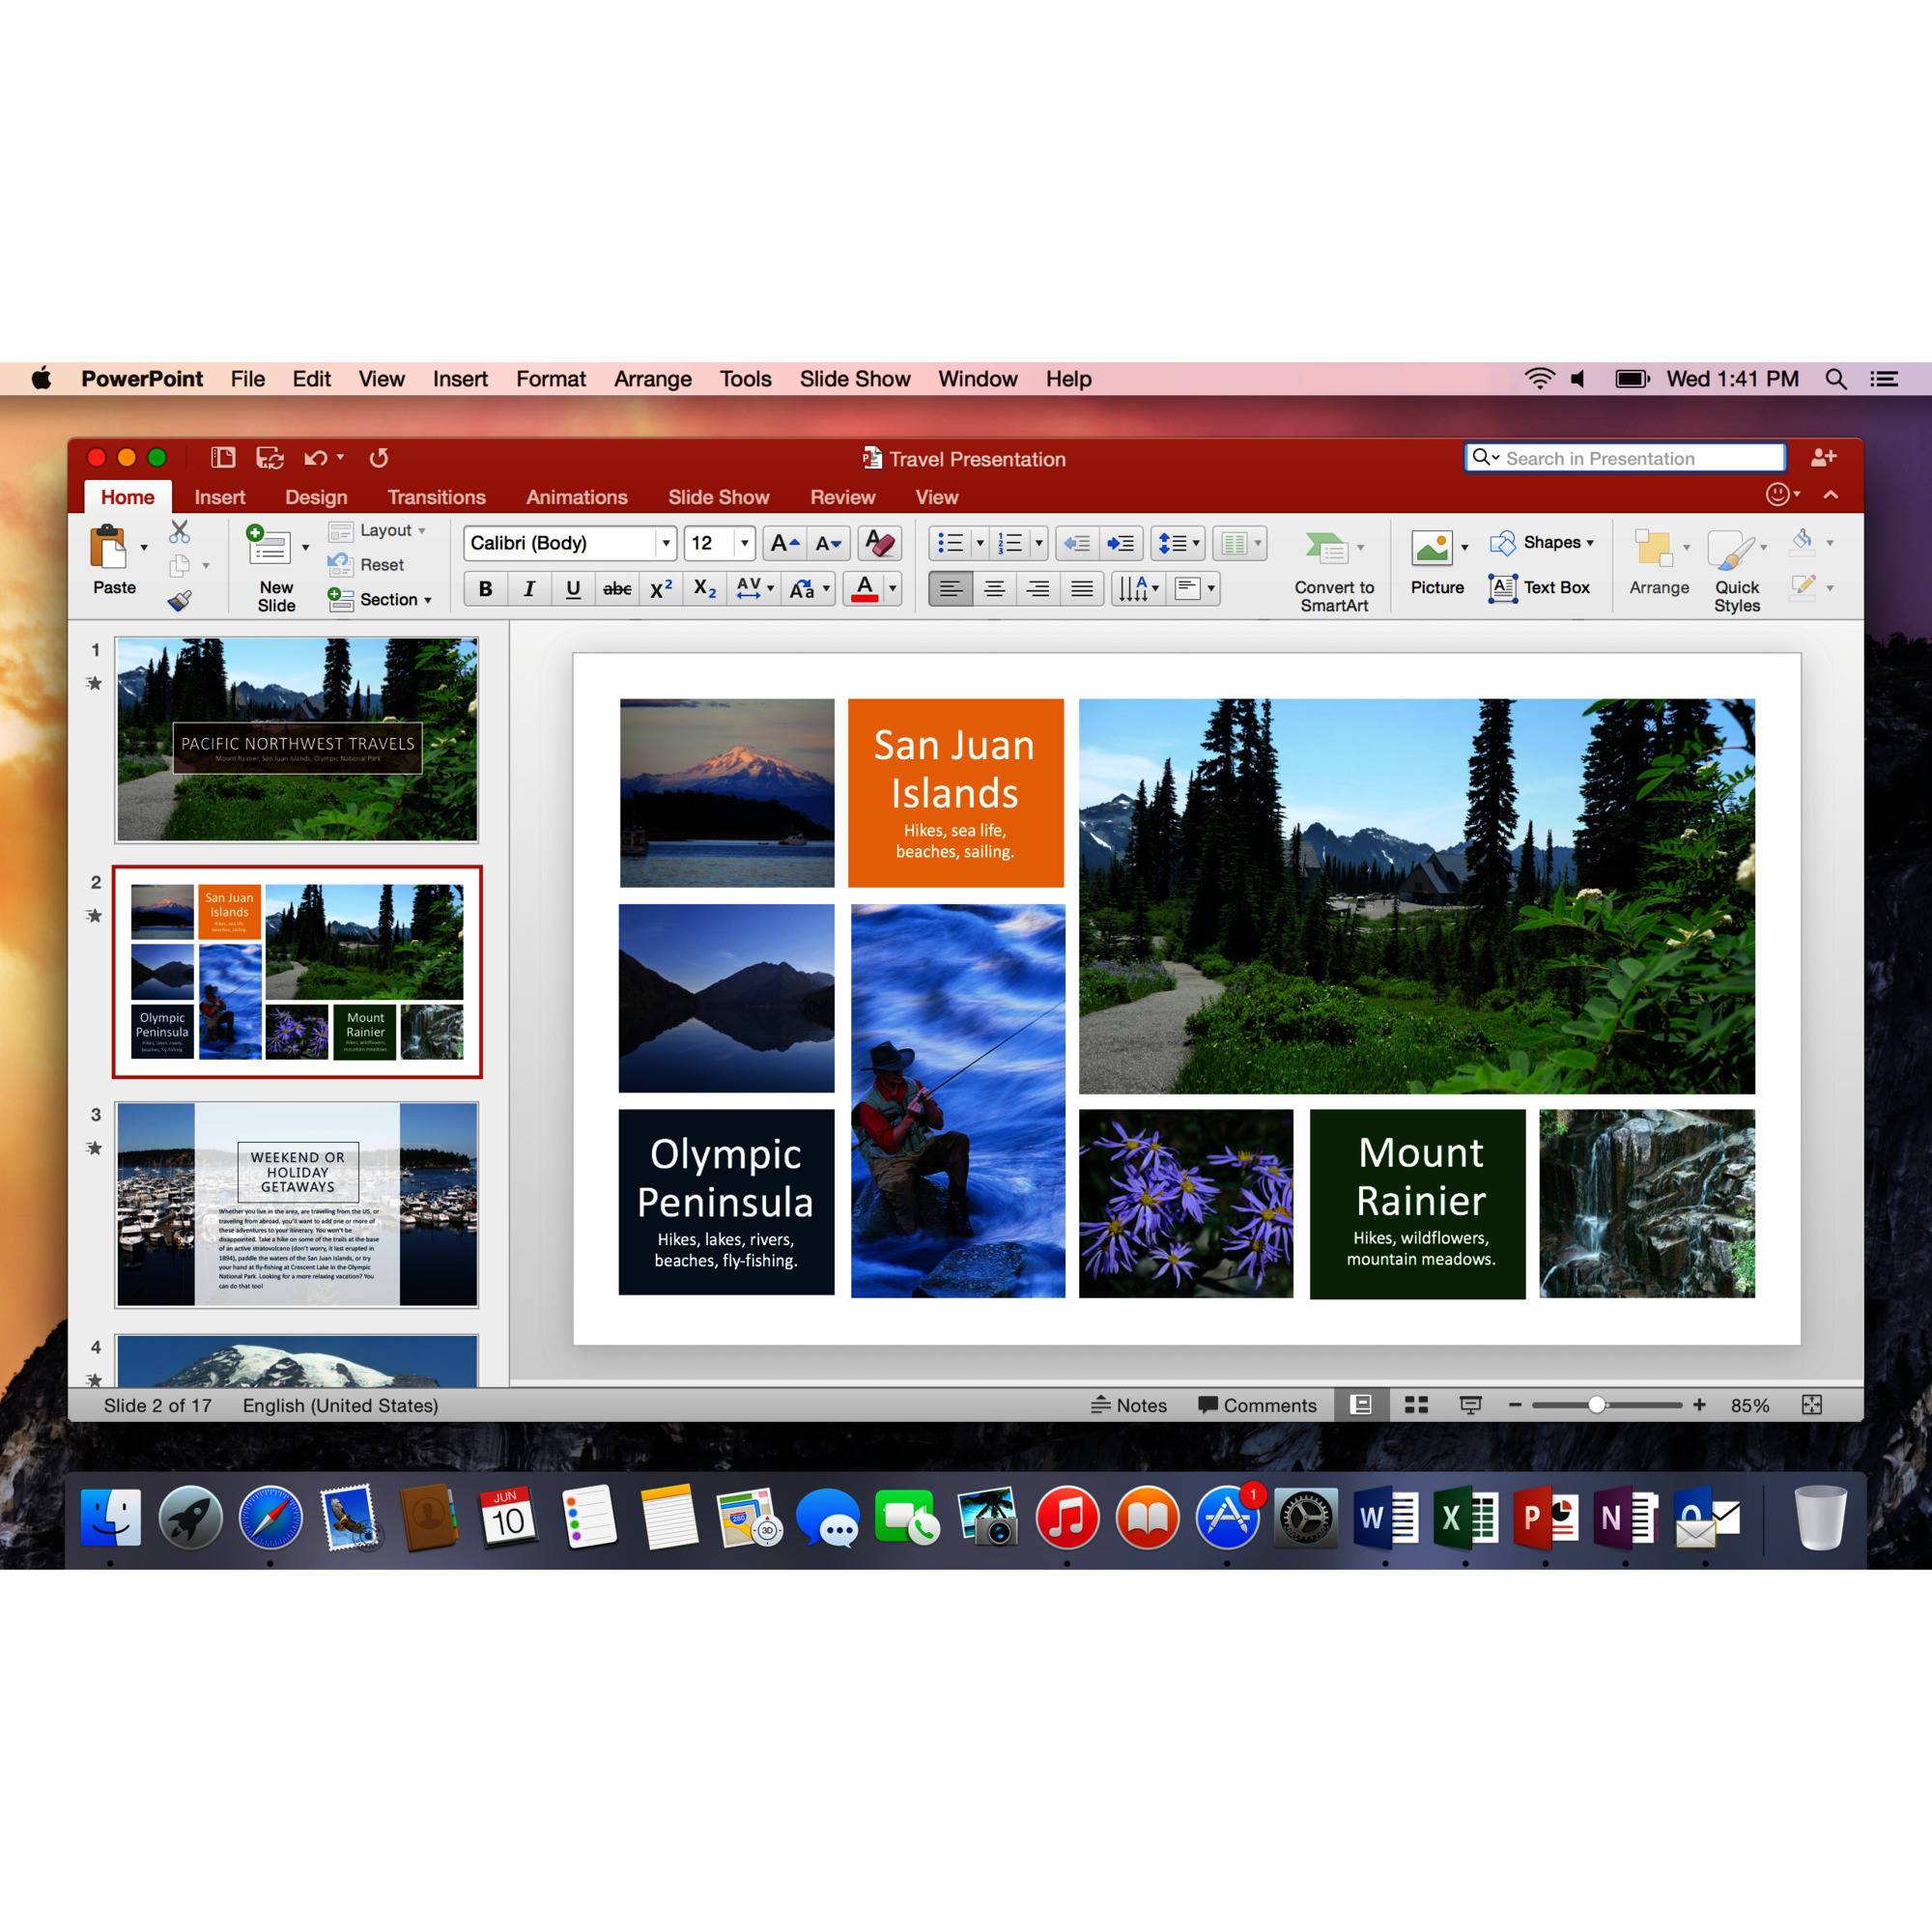 microsoft word for mac student free download